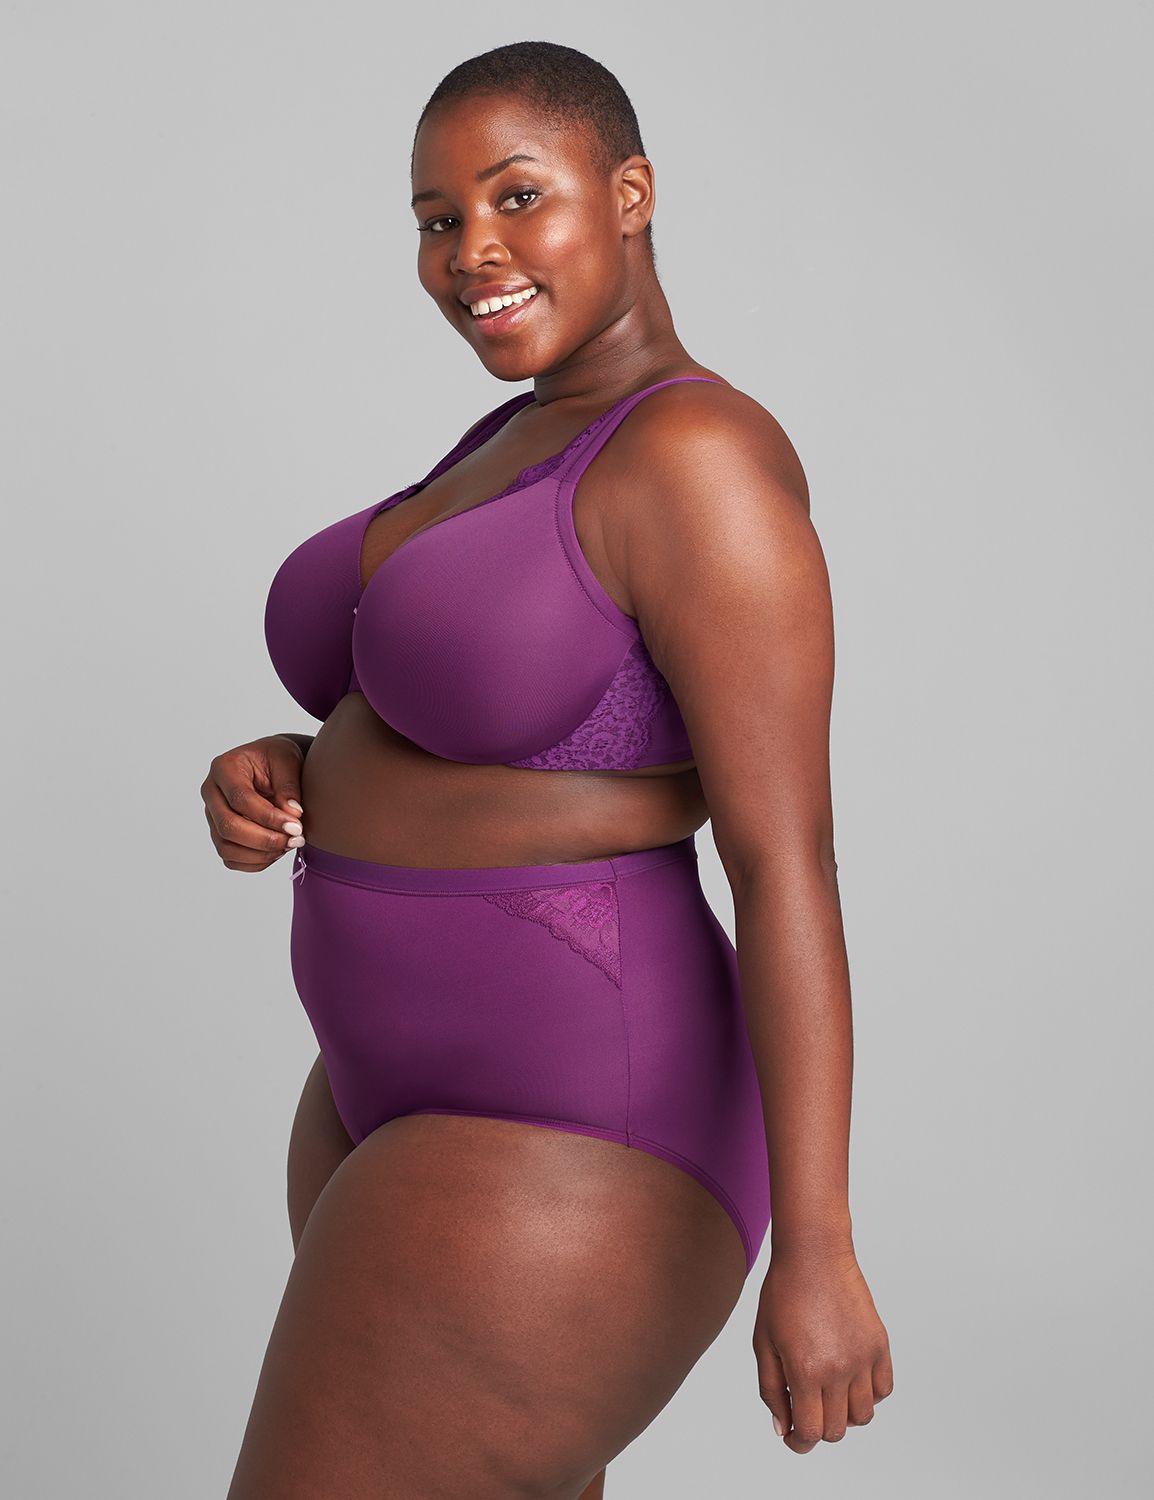 Lane Bryant - Lela Rose + Cacique = a match made in (boudoir) heaven. Meet  the exclusive collection here